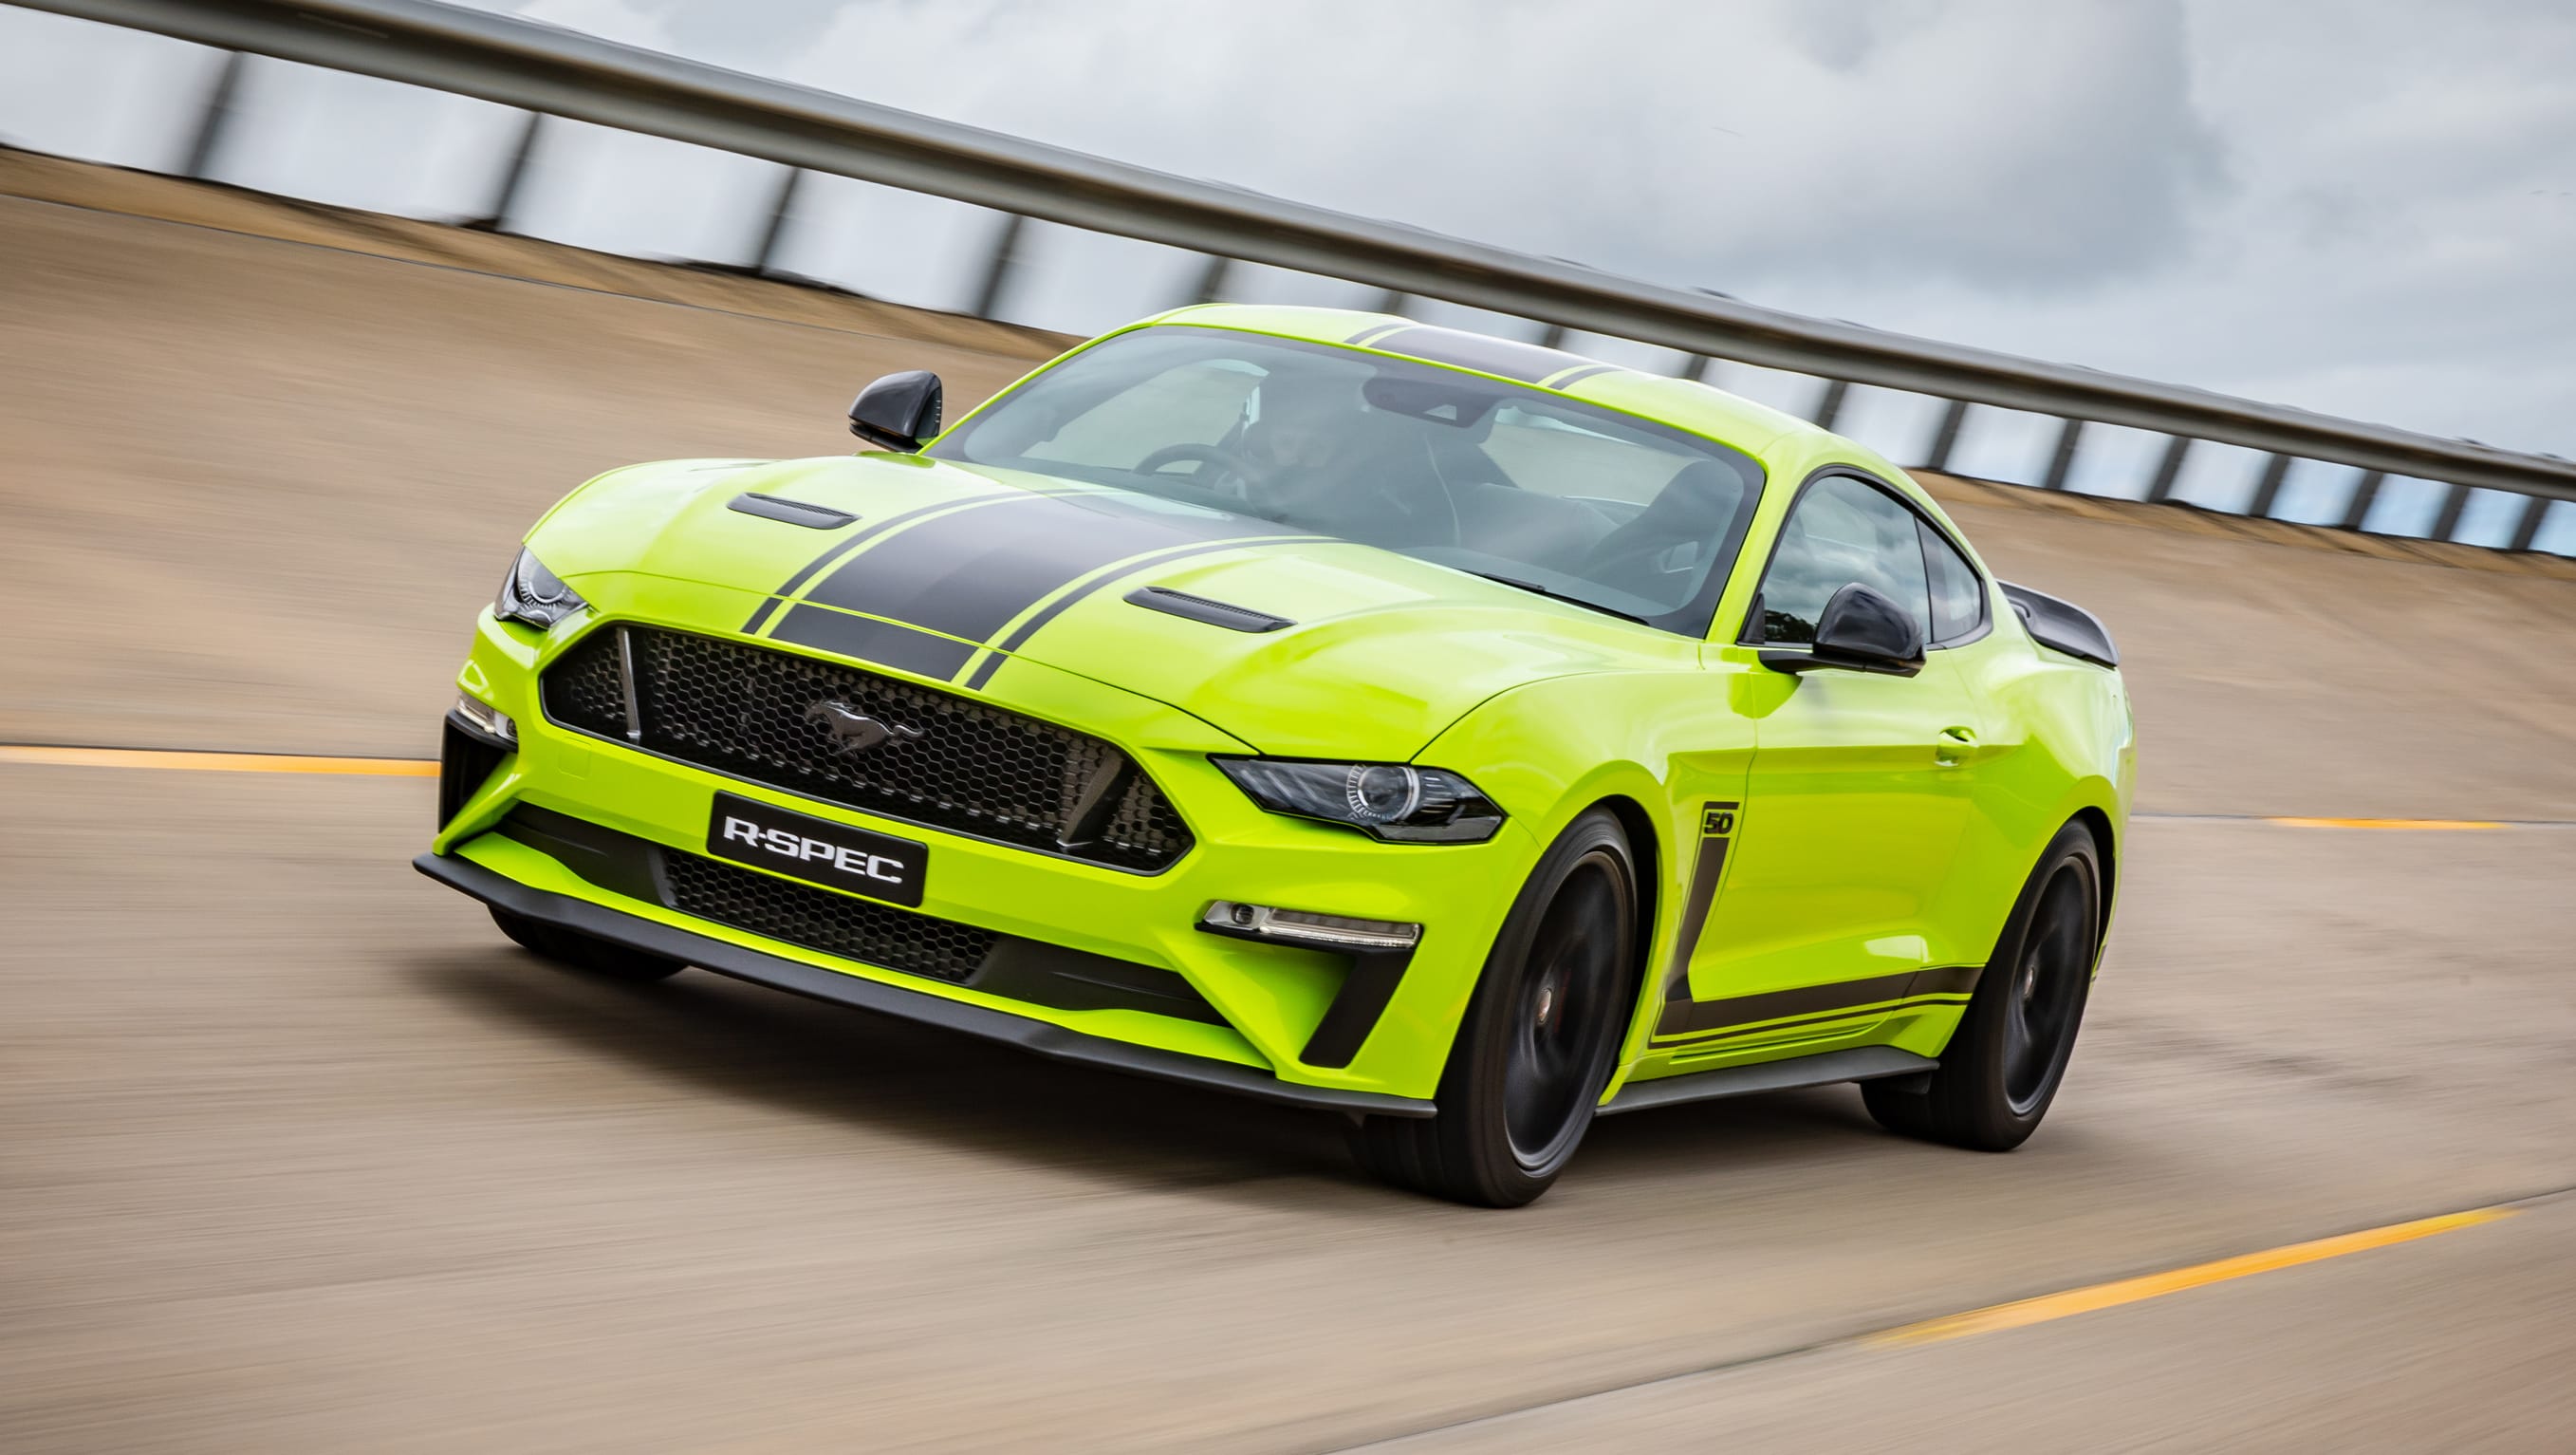 Meet the Ford Mustang RSpec 2020, Australia's answer to the Shelby